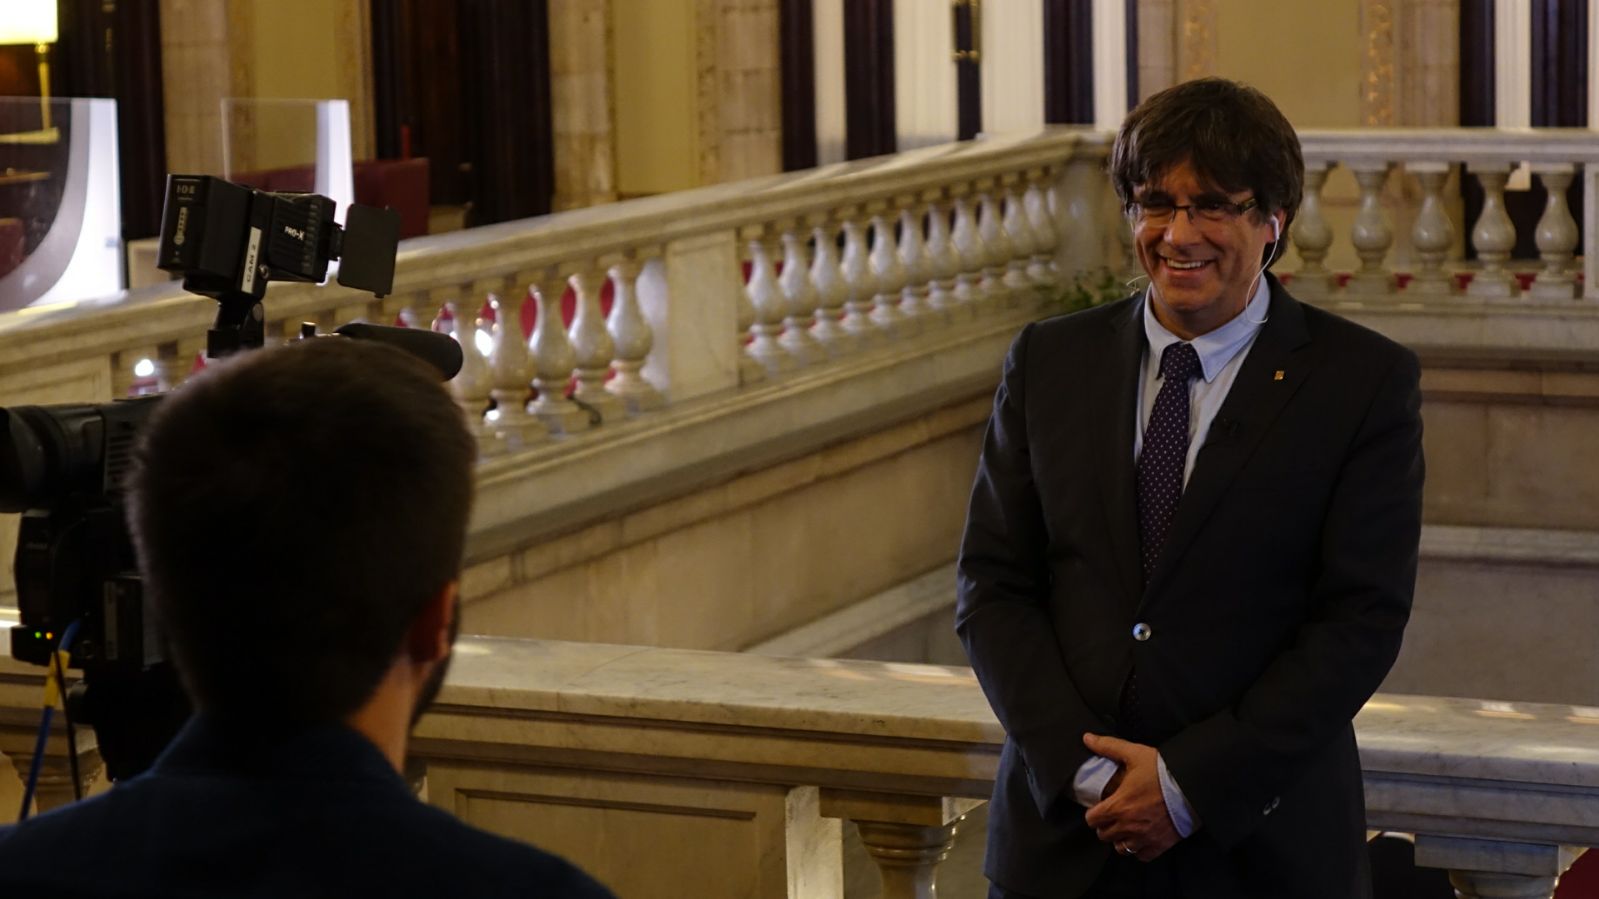 "They won't suspend democracy", Catalan president Puigdemont to Constitutional Court